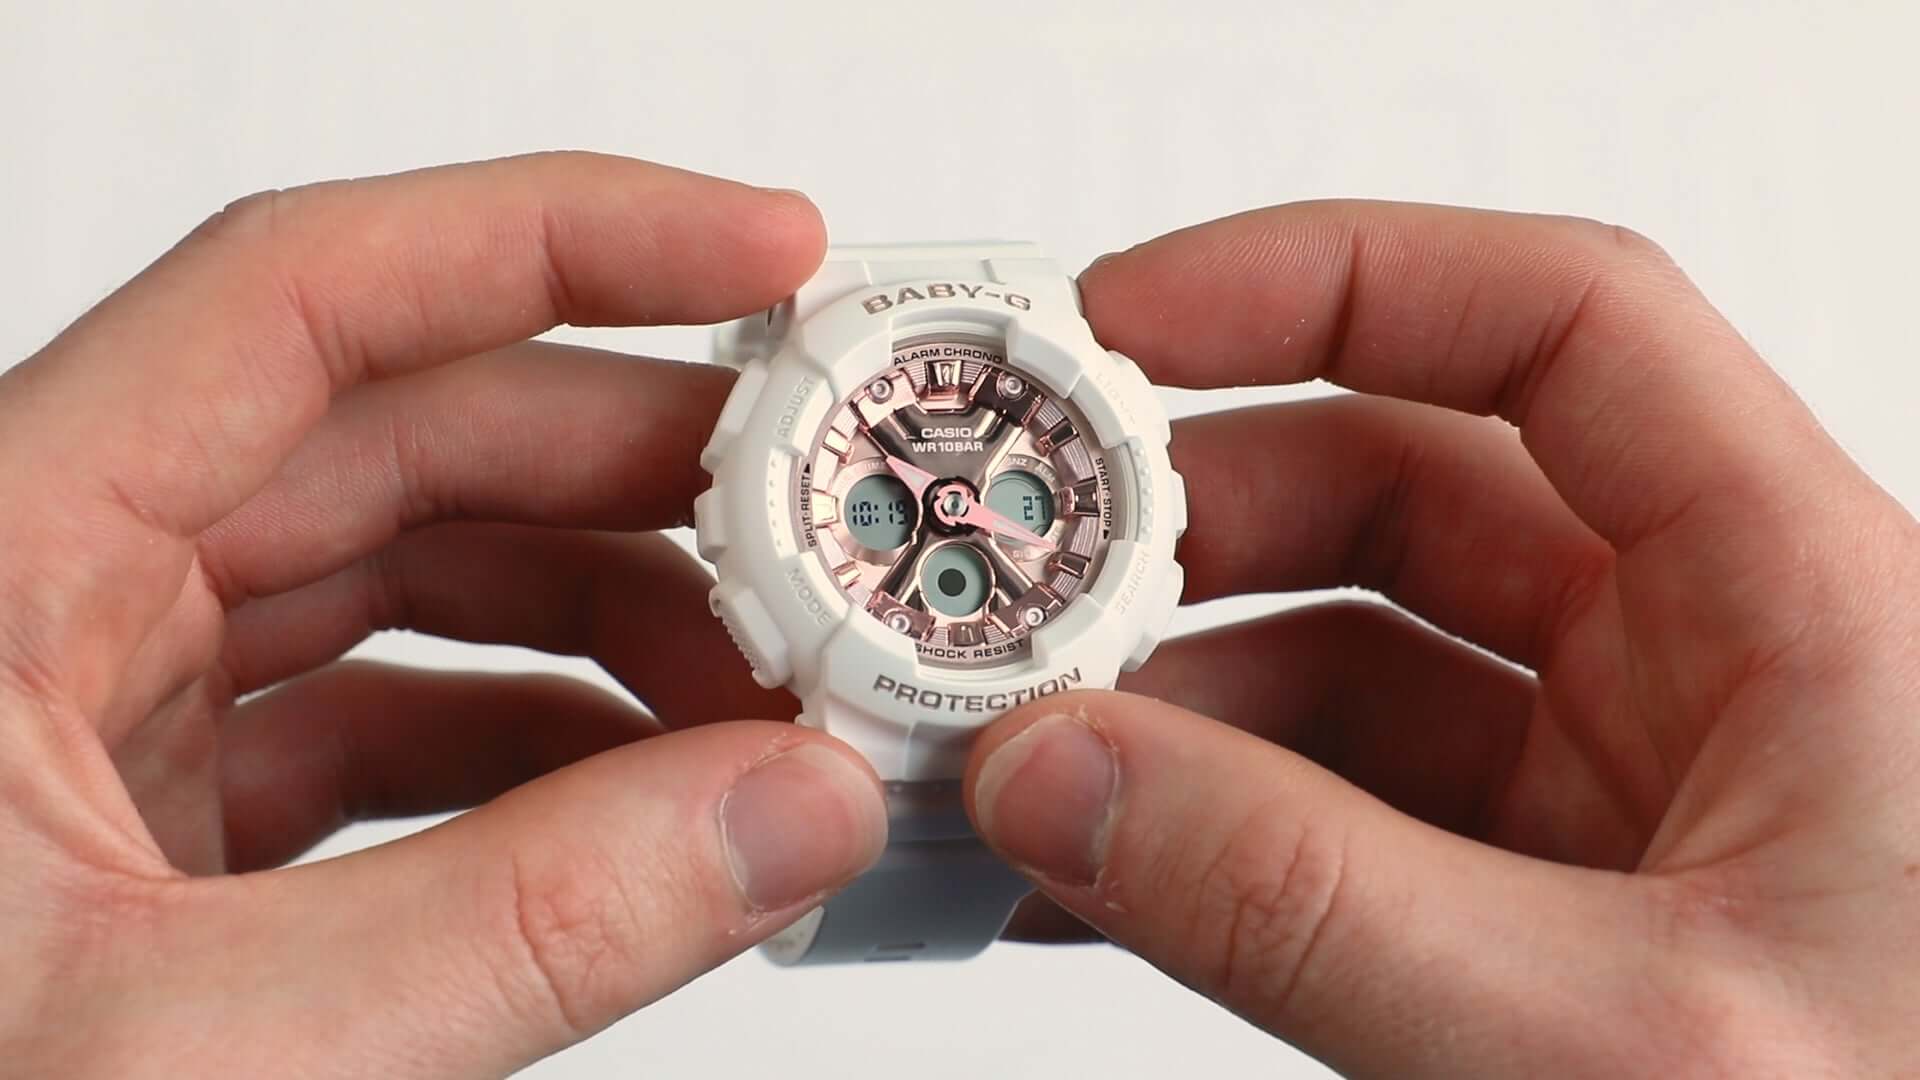 How To Change Time On Baby-G Watches – Watch Depot